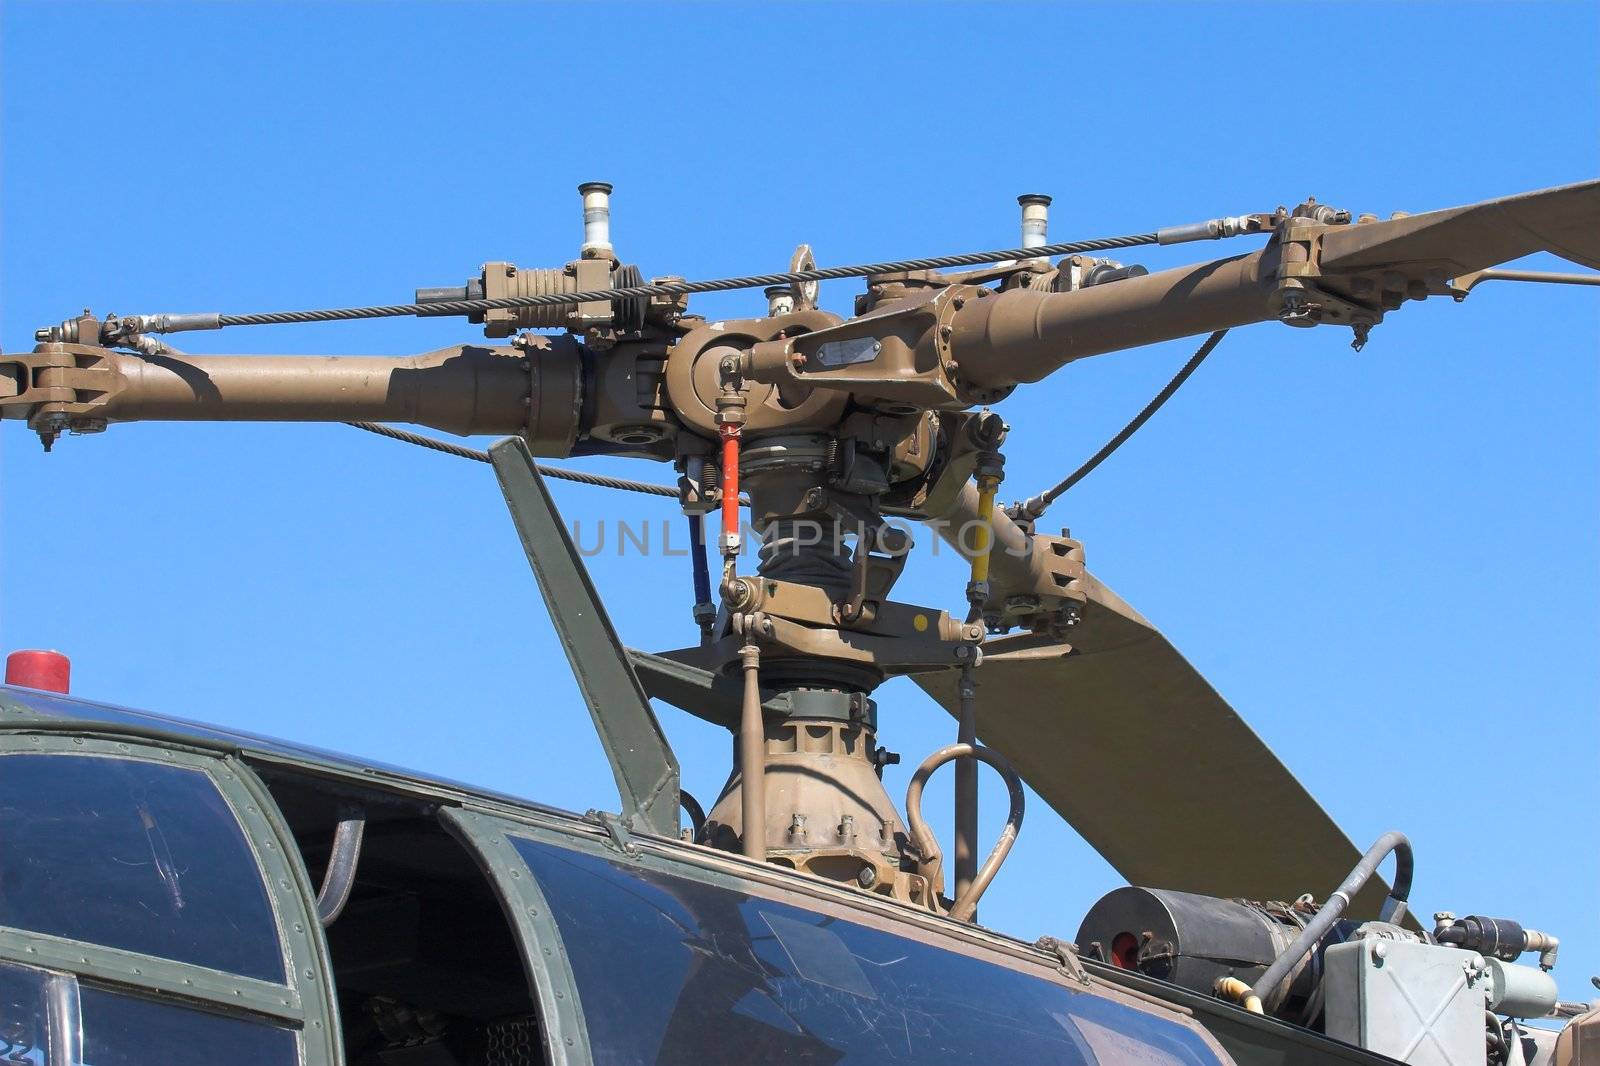 Close up of the roter mechanism of a helicopter